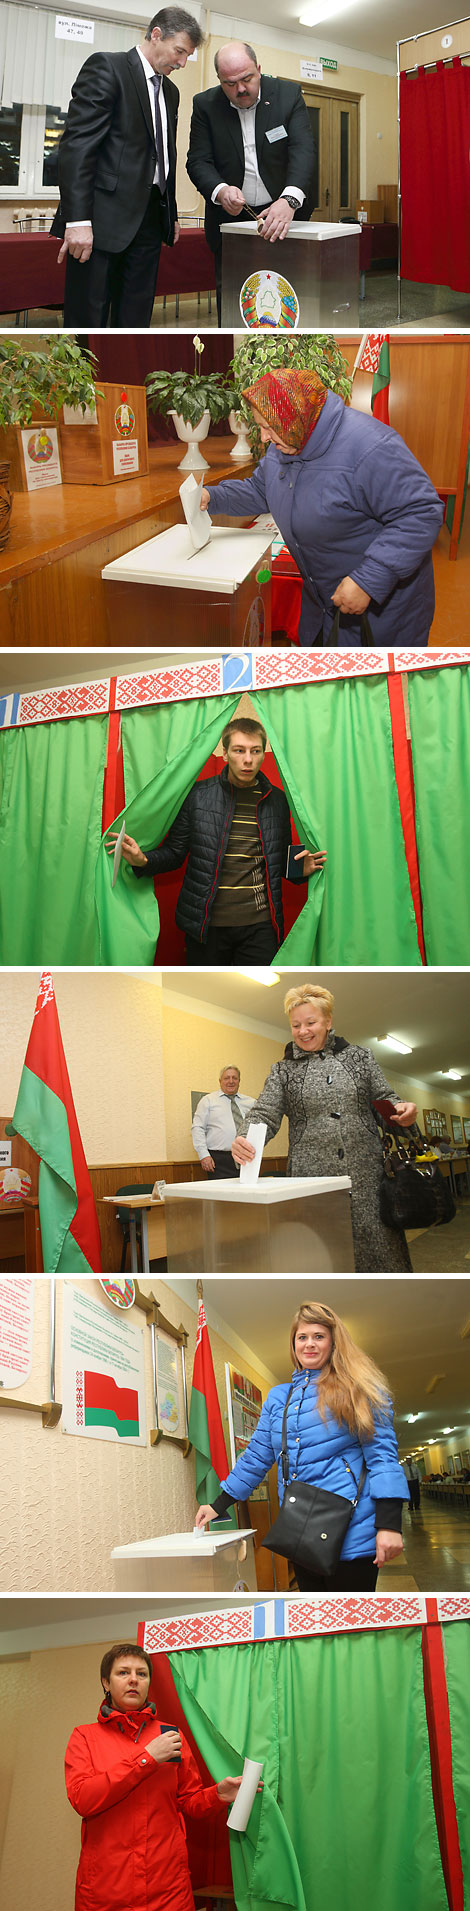 Polling station No. 59 in Grodno